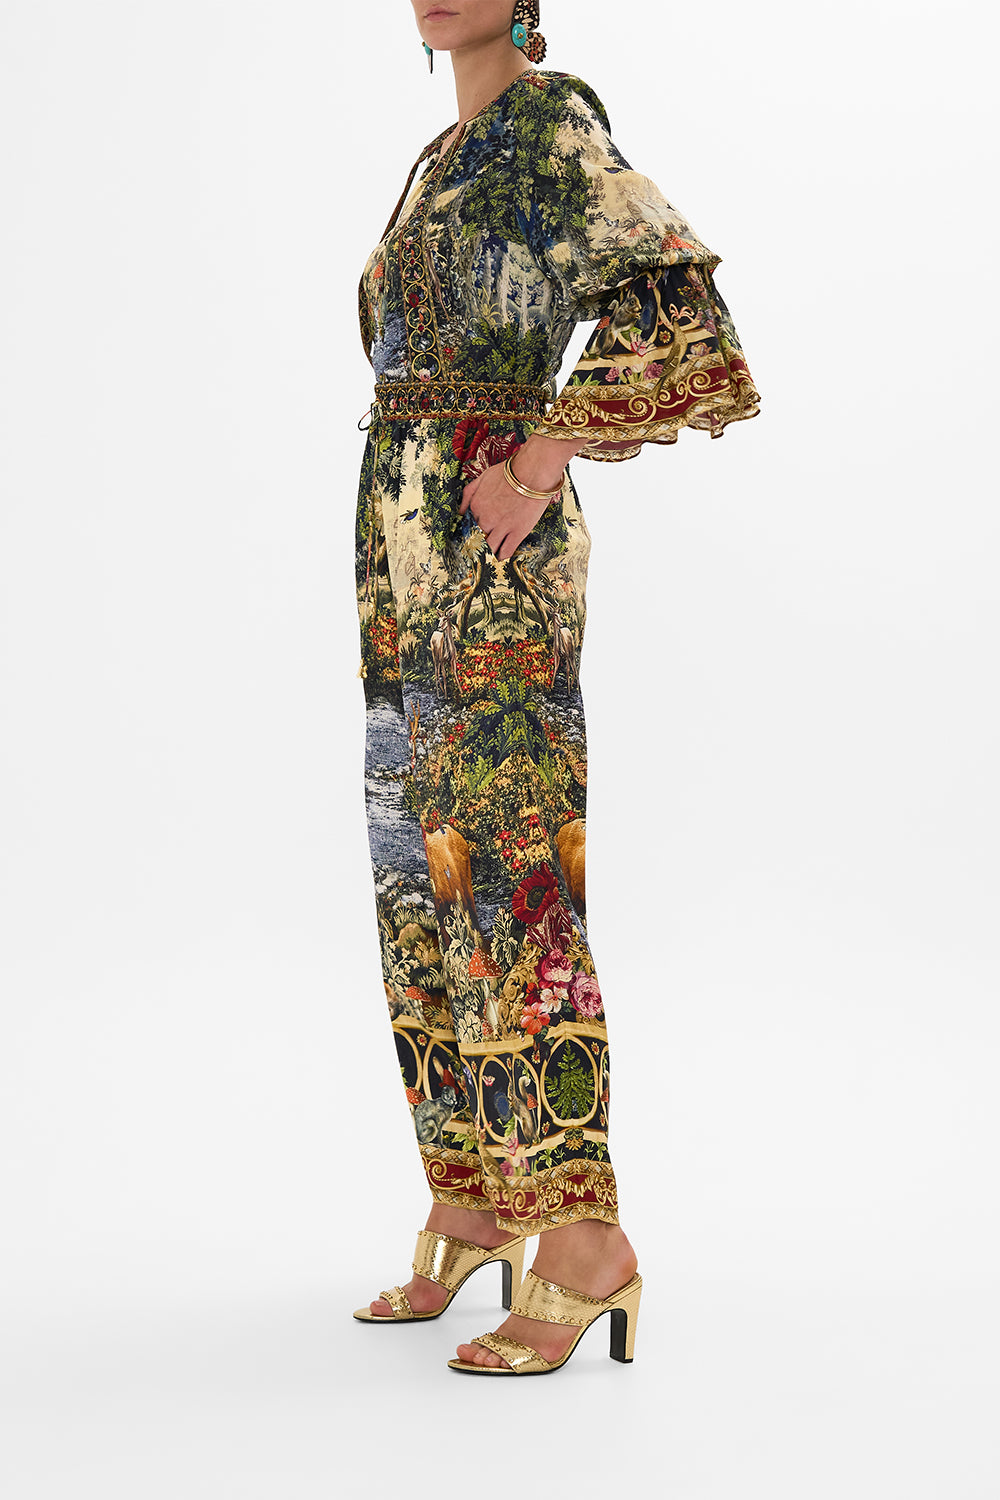 STRAIGHT LEG PANT TAPESTRY TOTEMS